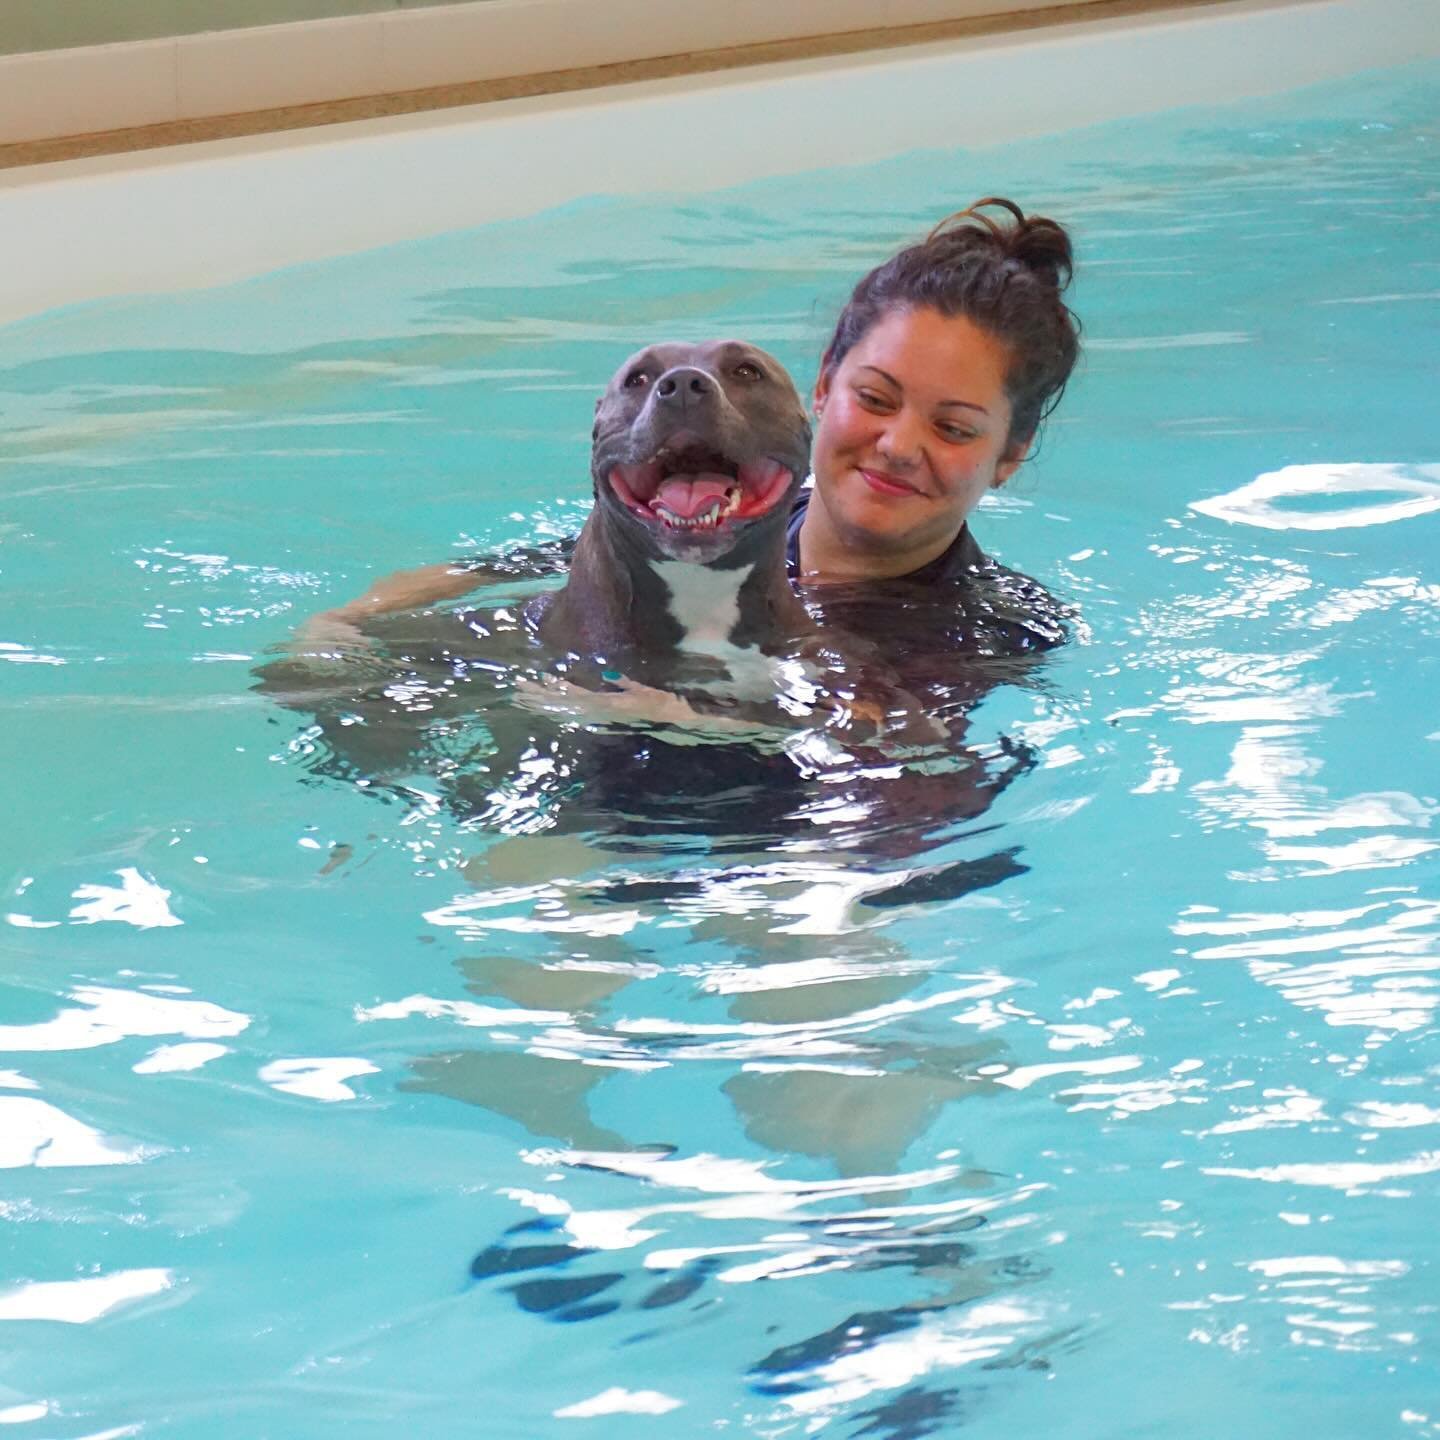 ✨Throwback Thursday✨ circa 2017-2018

When it all started☁️I began my canine hydrotherapy journey in early 2017 &amp; became certified in early 2018. Prior to the creation of Dip&rsquo;n Dogs, I worked as a hydrotherapist for a local business, then s